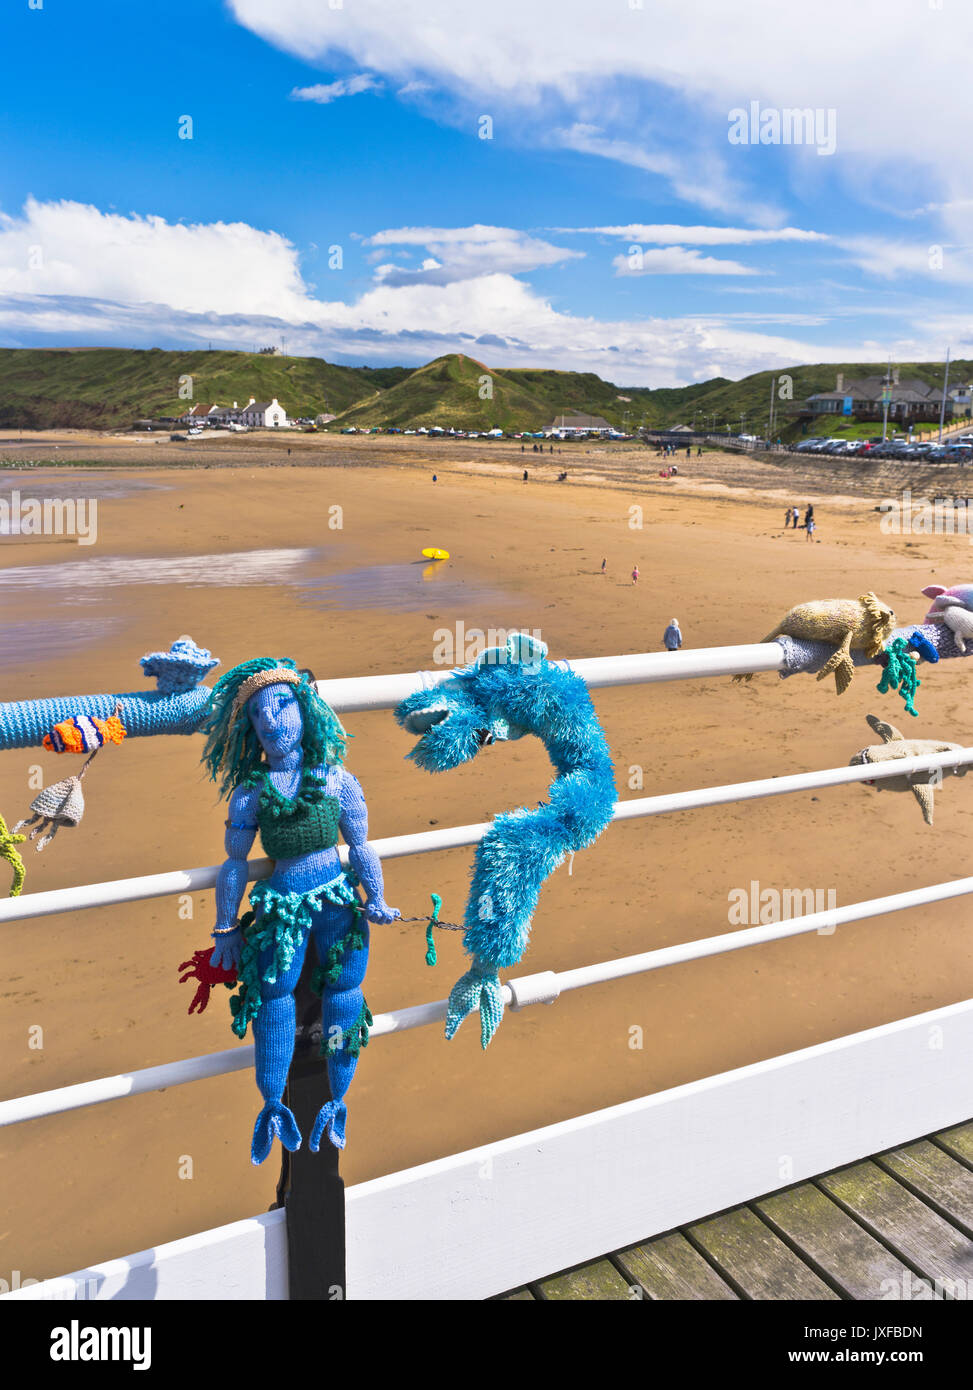 dh Guerilla knitting pier SALTBURN BY THE SEA CLEVELAND Knitted sea figures Neptune seahorse crochet yarn bombing knit storming art Stock Photo